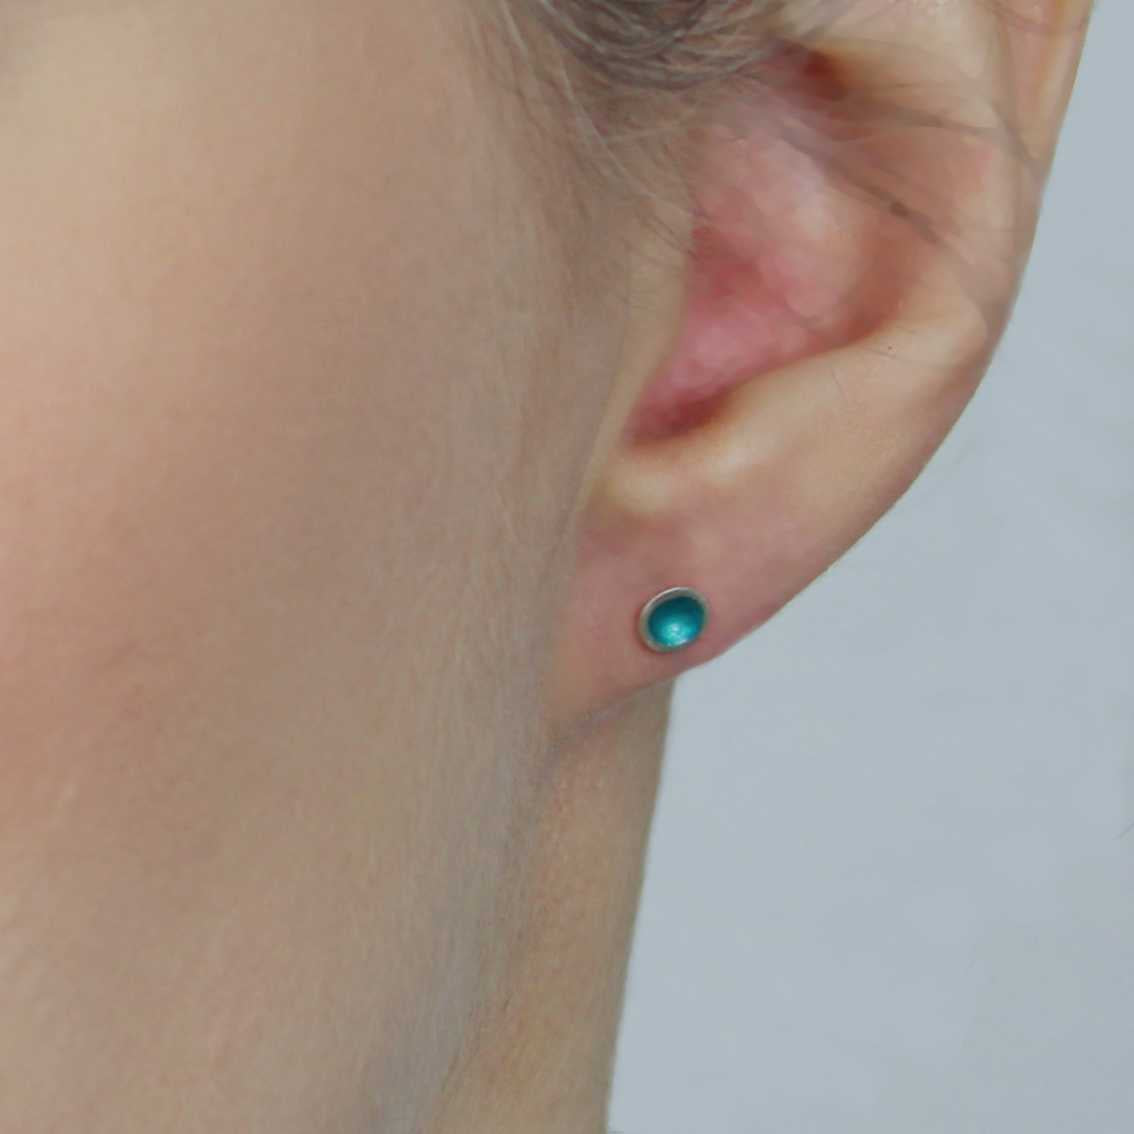 Halo Small Silver and Enamel Stud Earring - Teal